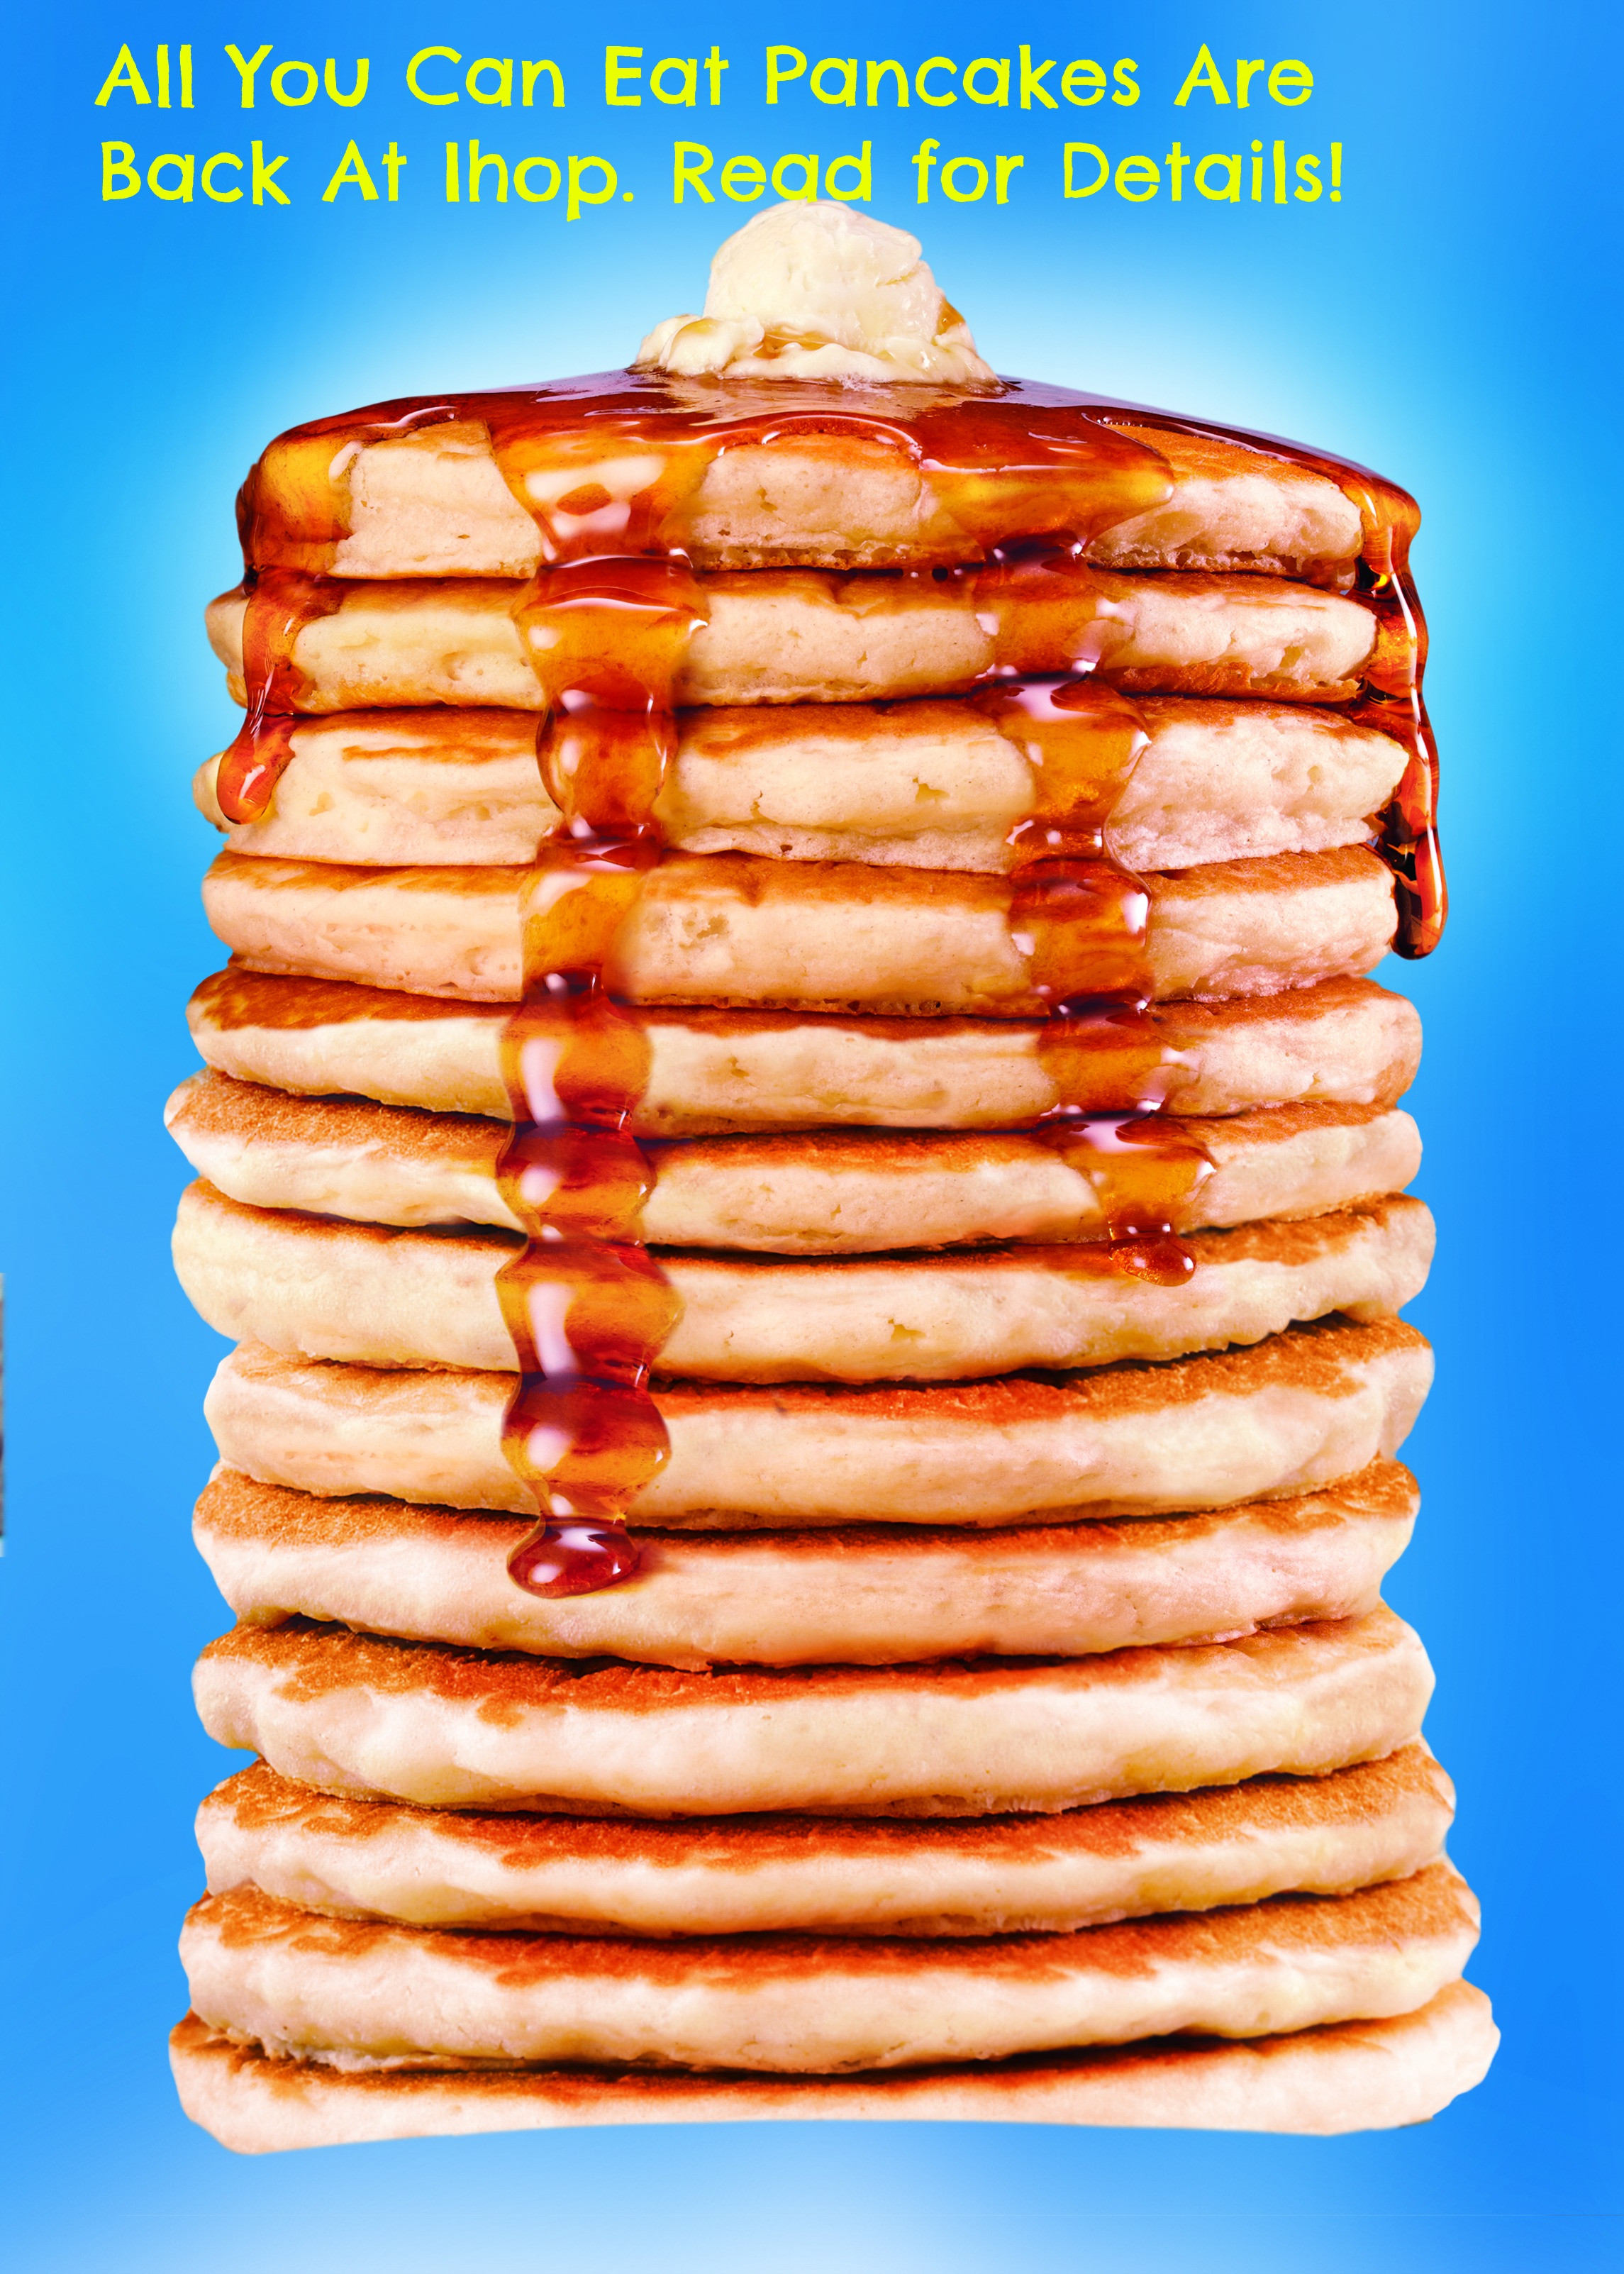 All You Can Eat Pancakes
 All You Can Eat Pancakes are Back at Ihop